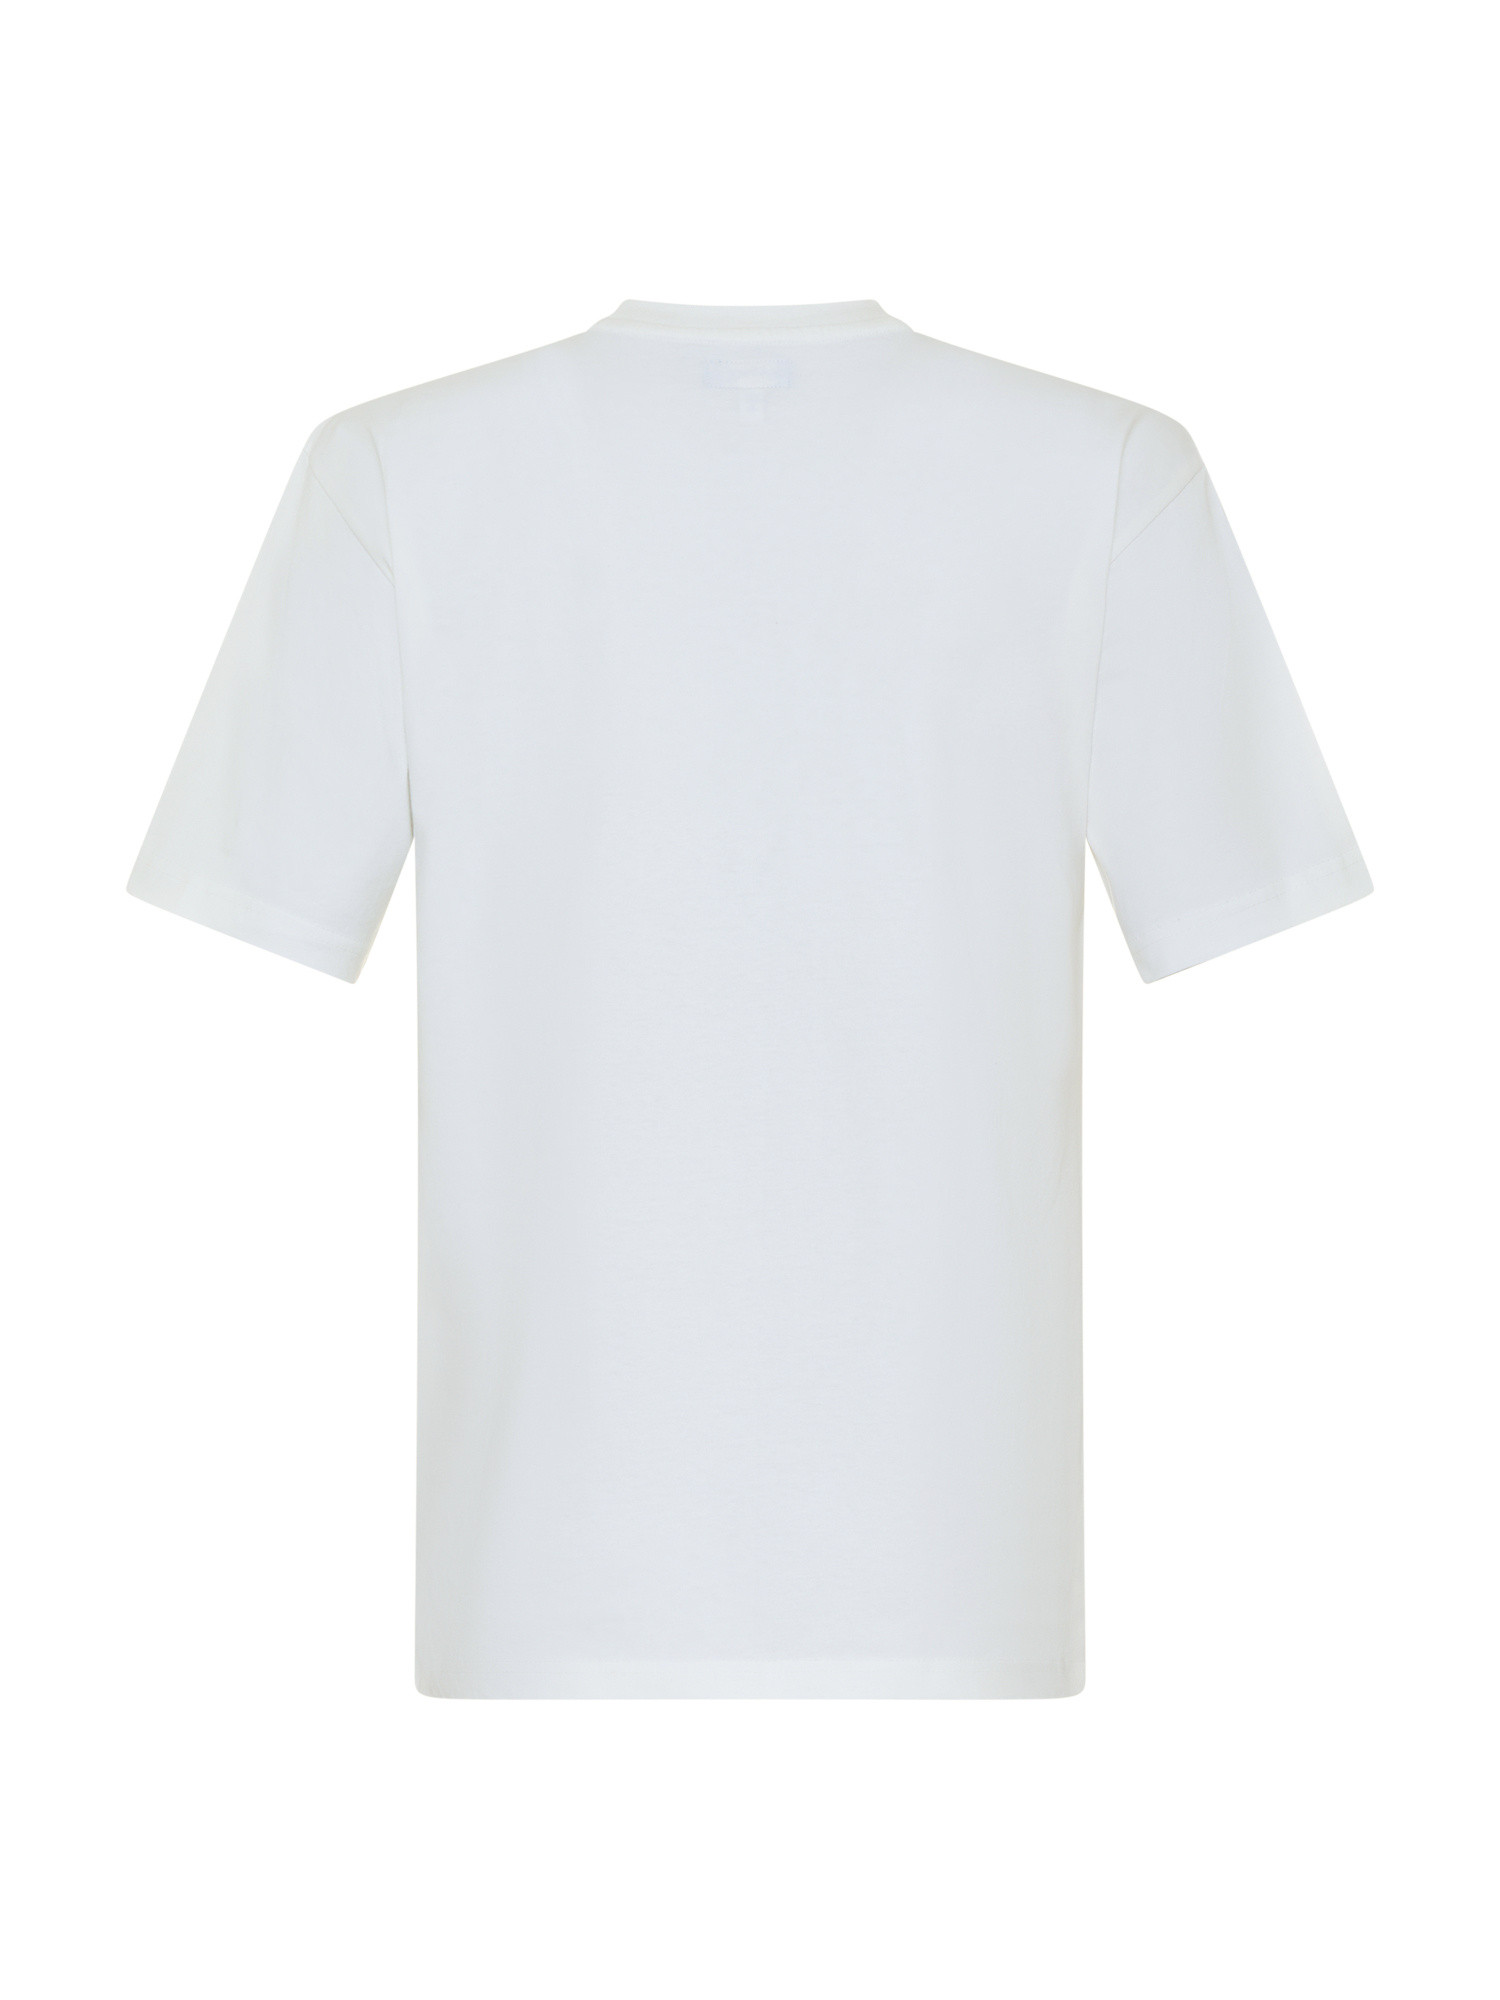 Market - T-shirt in cotone con stampa, Bianco, large image number 1